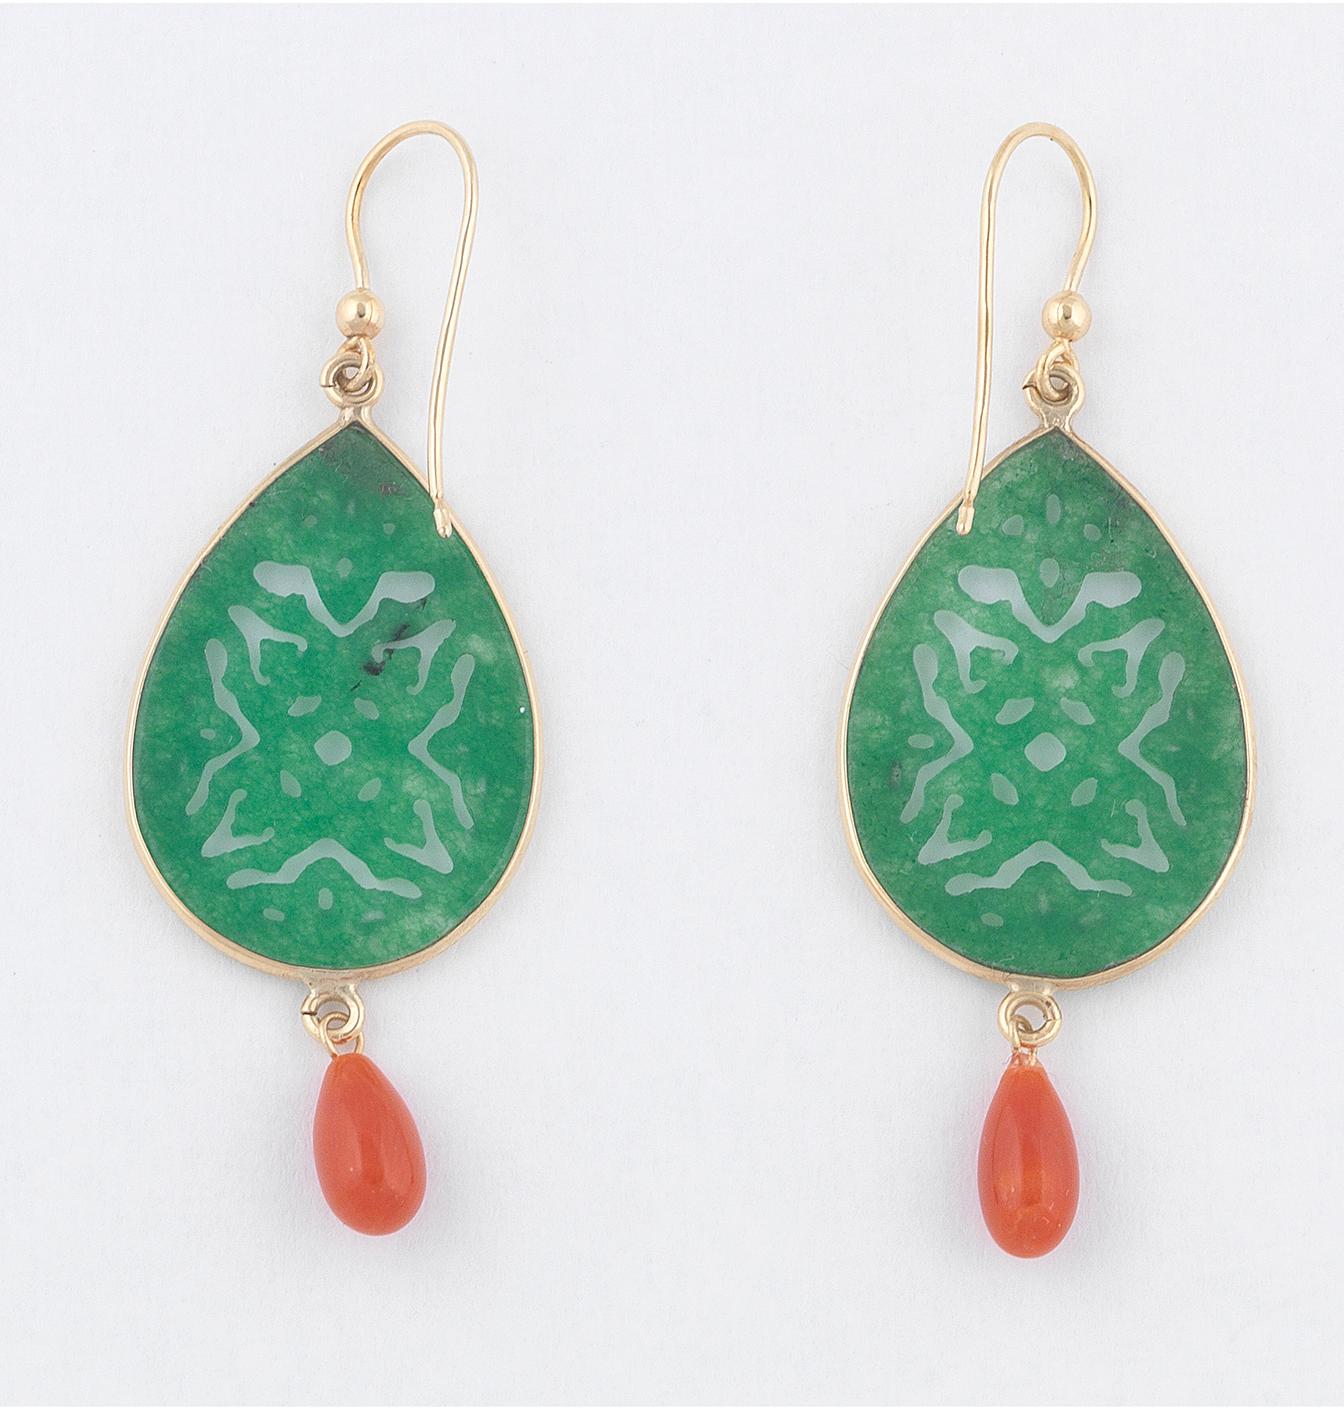 Long earrings in 18kt yellow gold with coral and jade
Lenght: 3,7cm
Weight : 4,5gr.